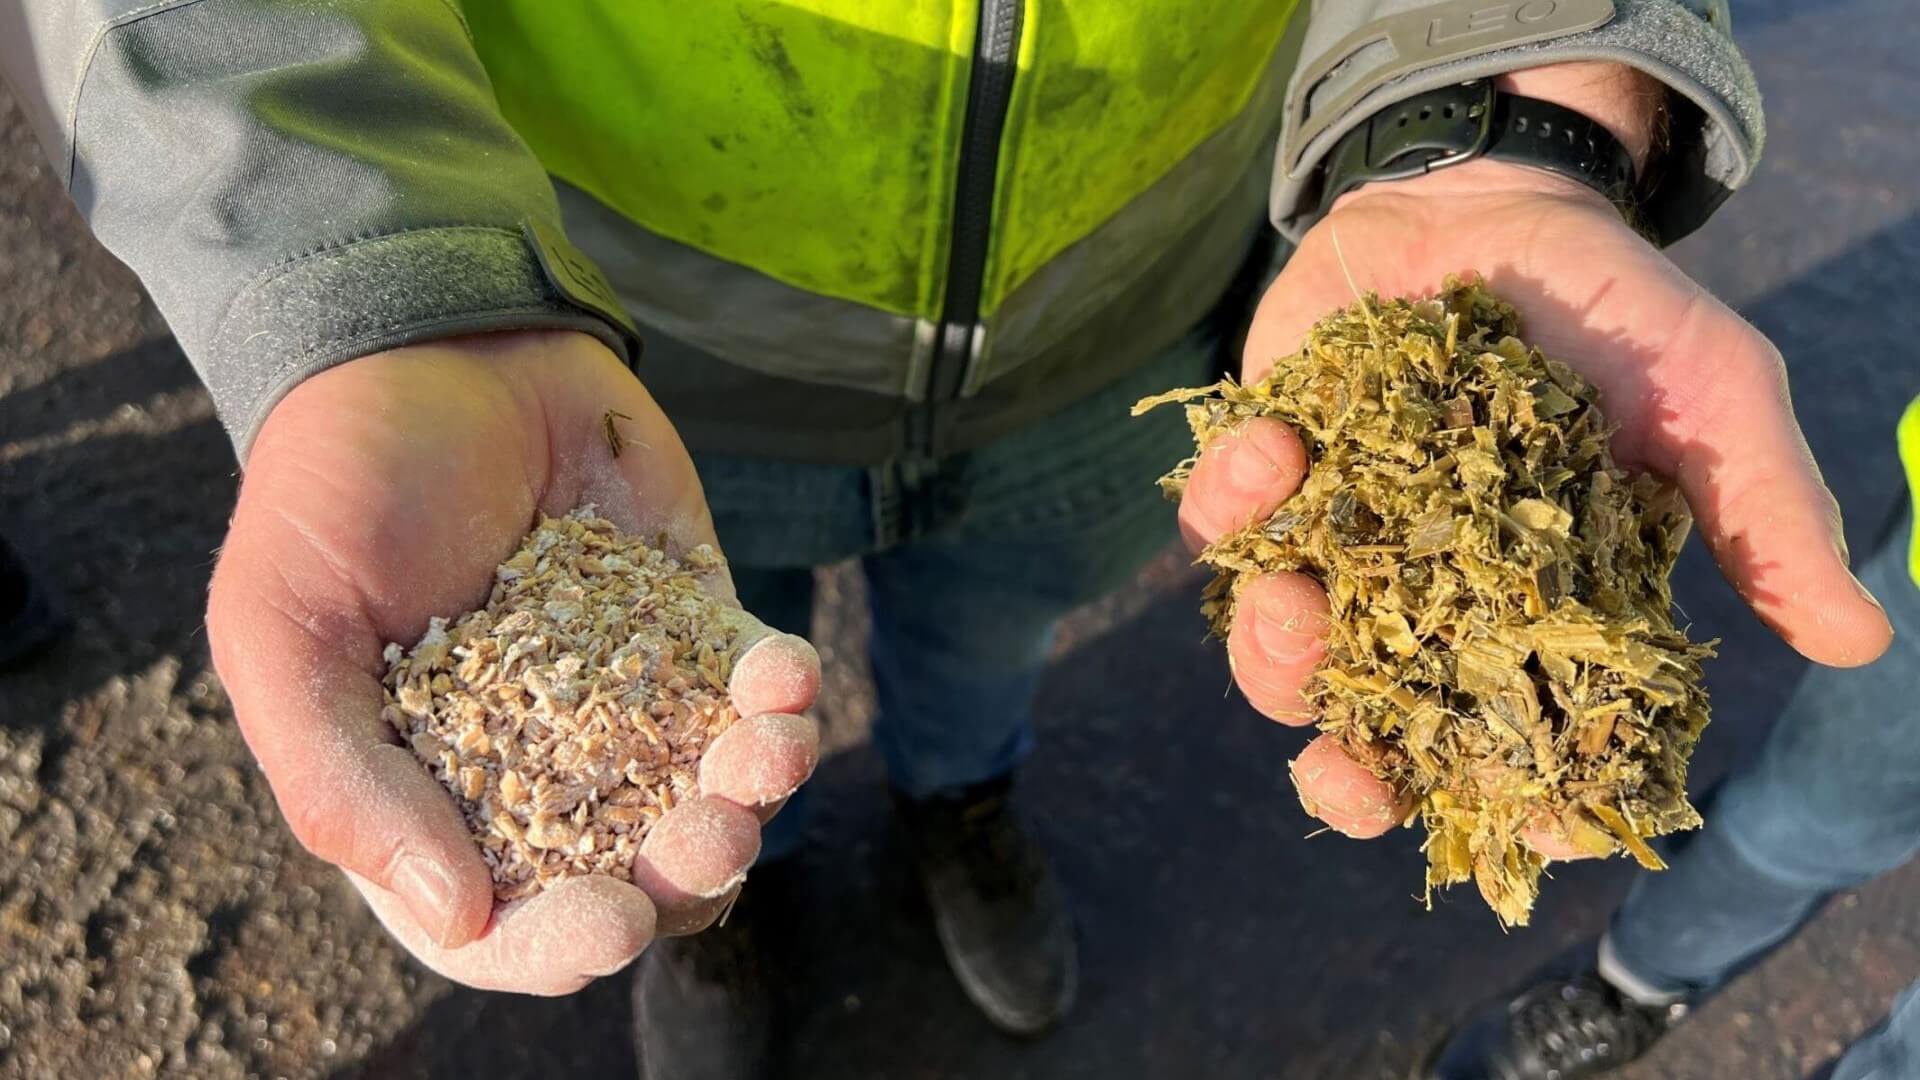 Close up of two hands, each palm upwards, holding a different form of shredded biomass feedstock